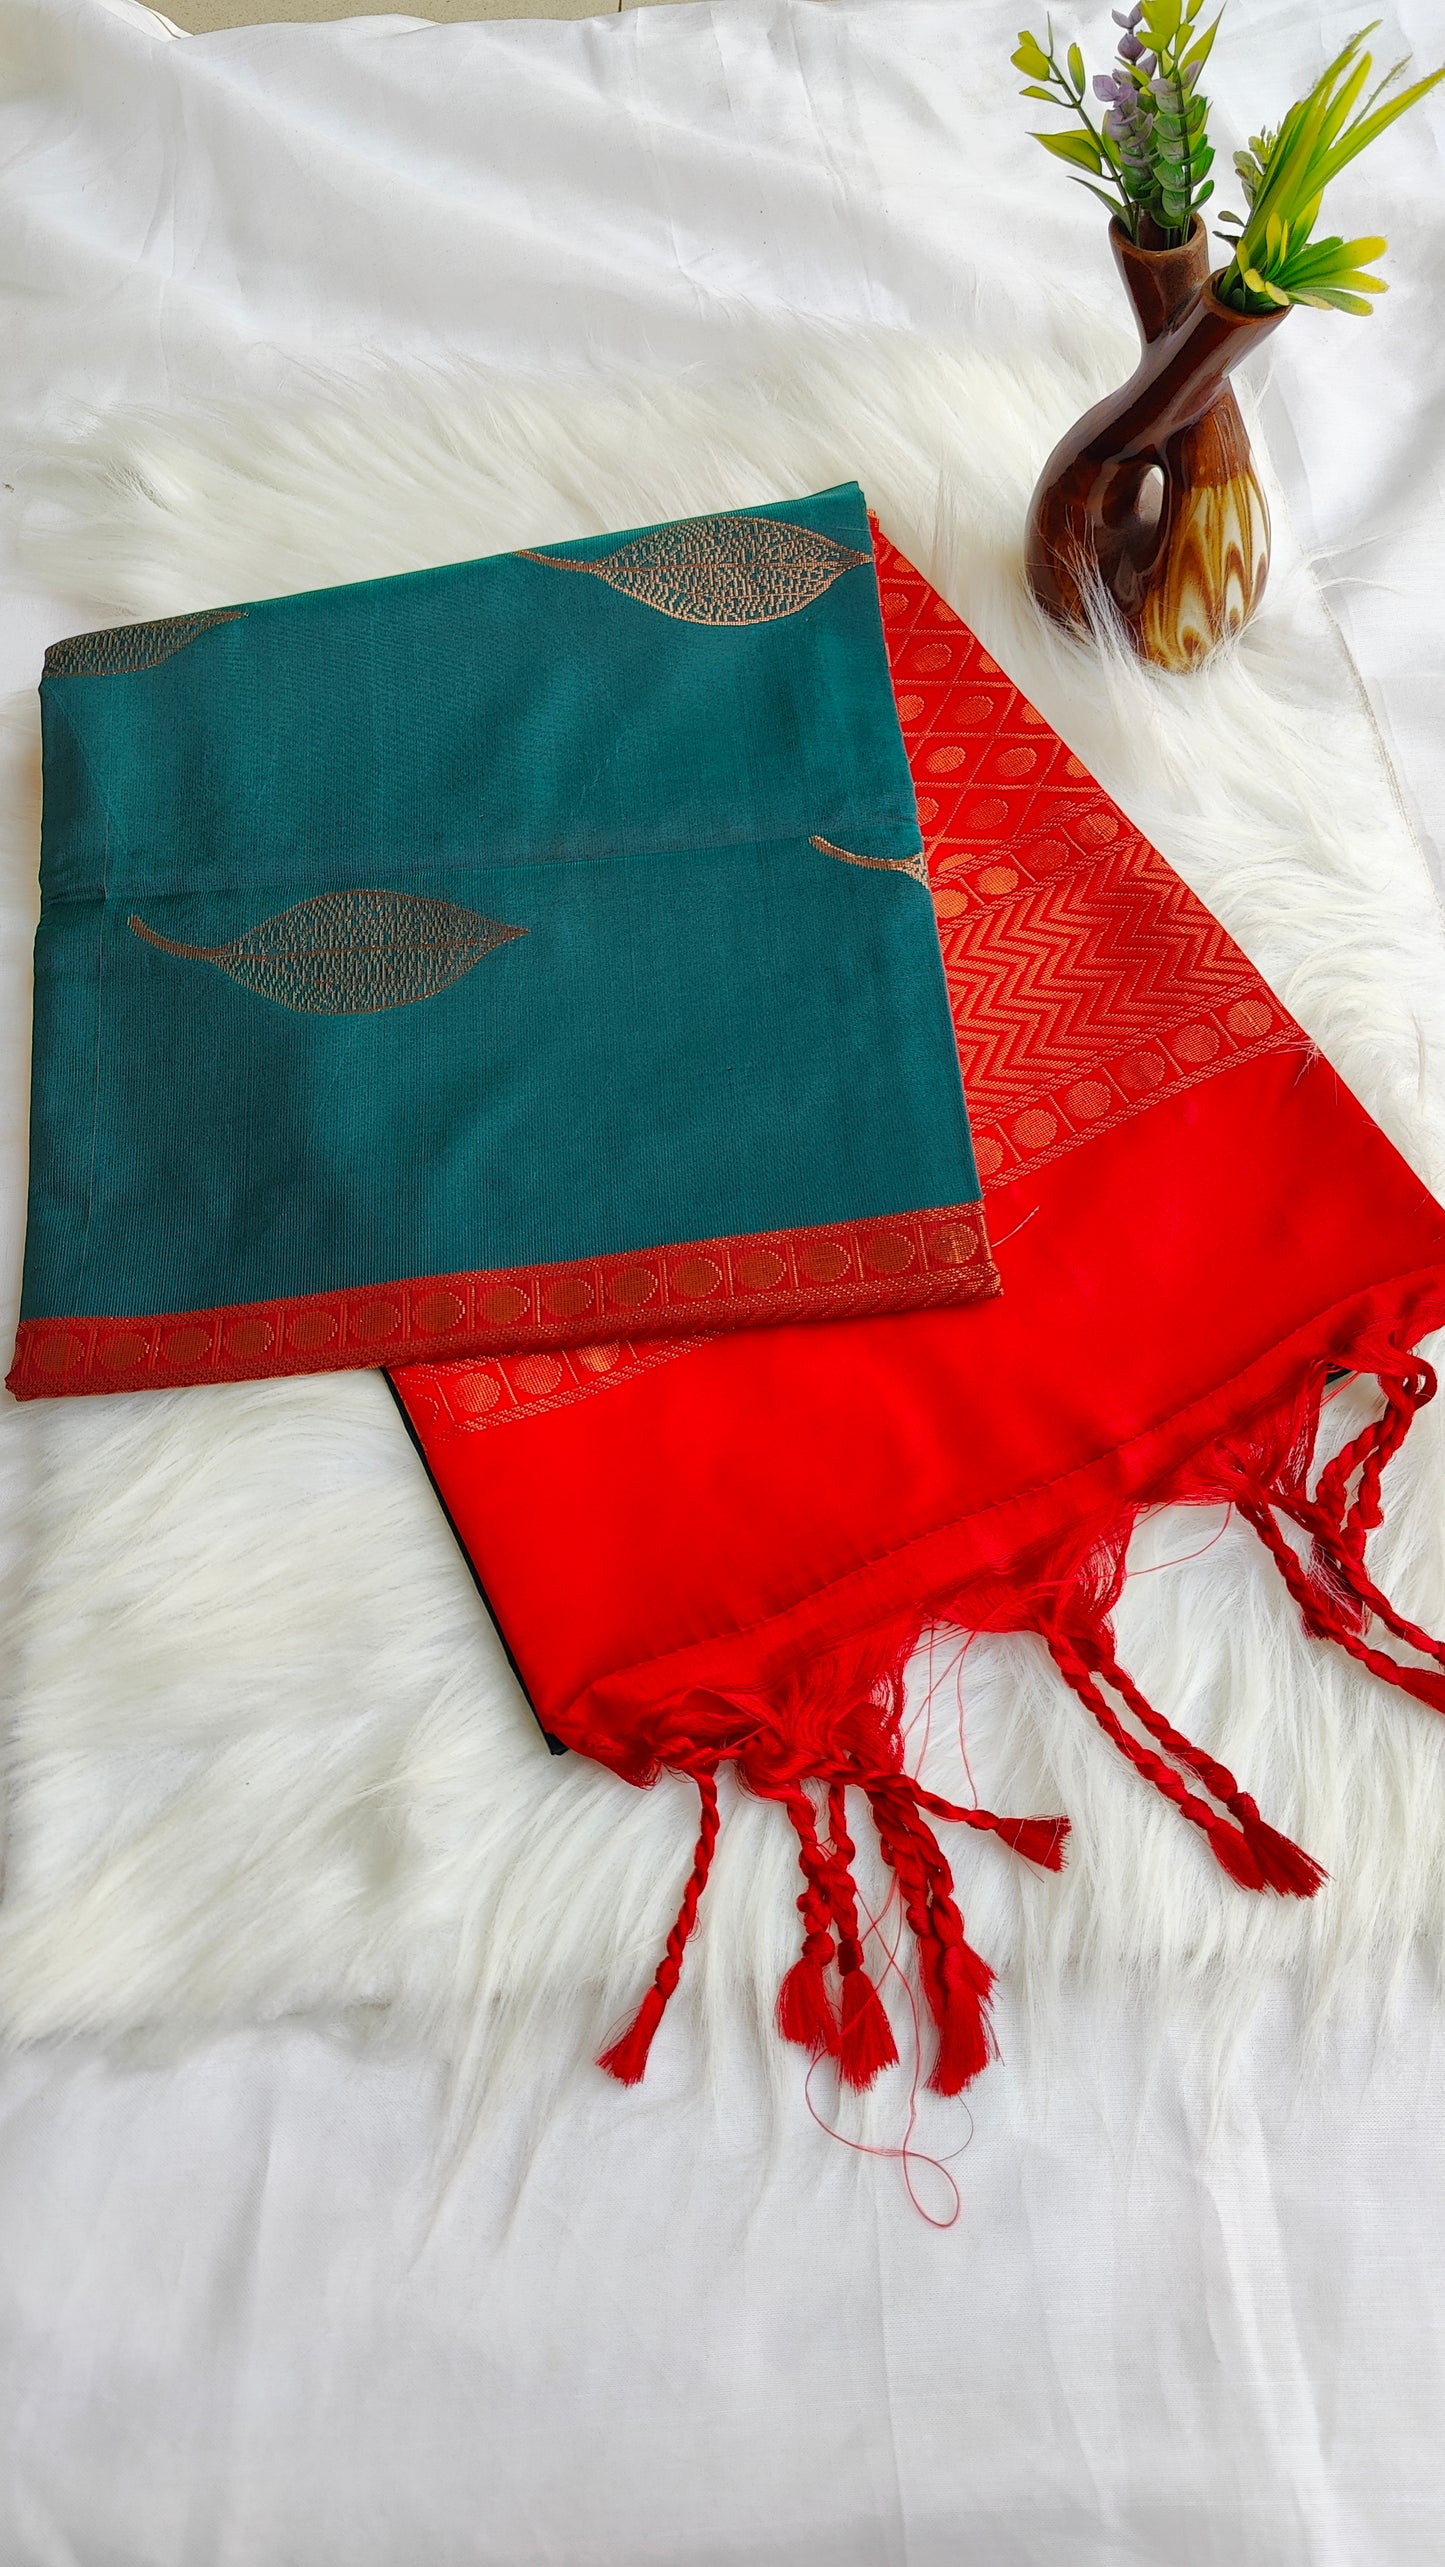 Vegan silk teal blue with red